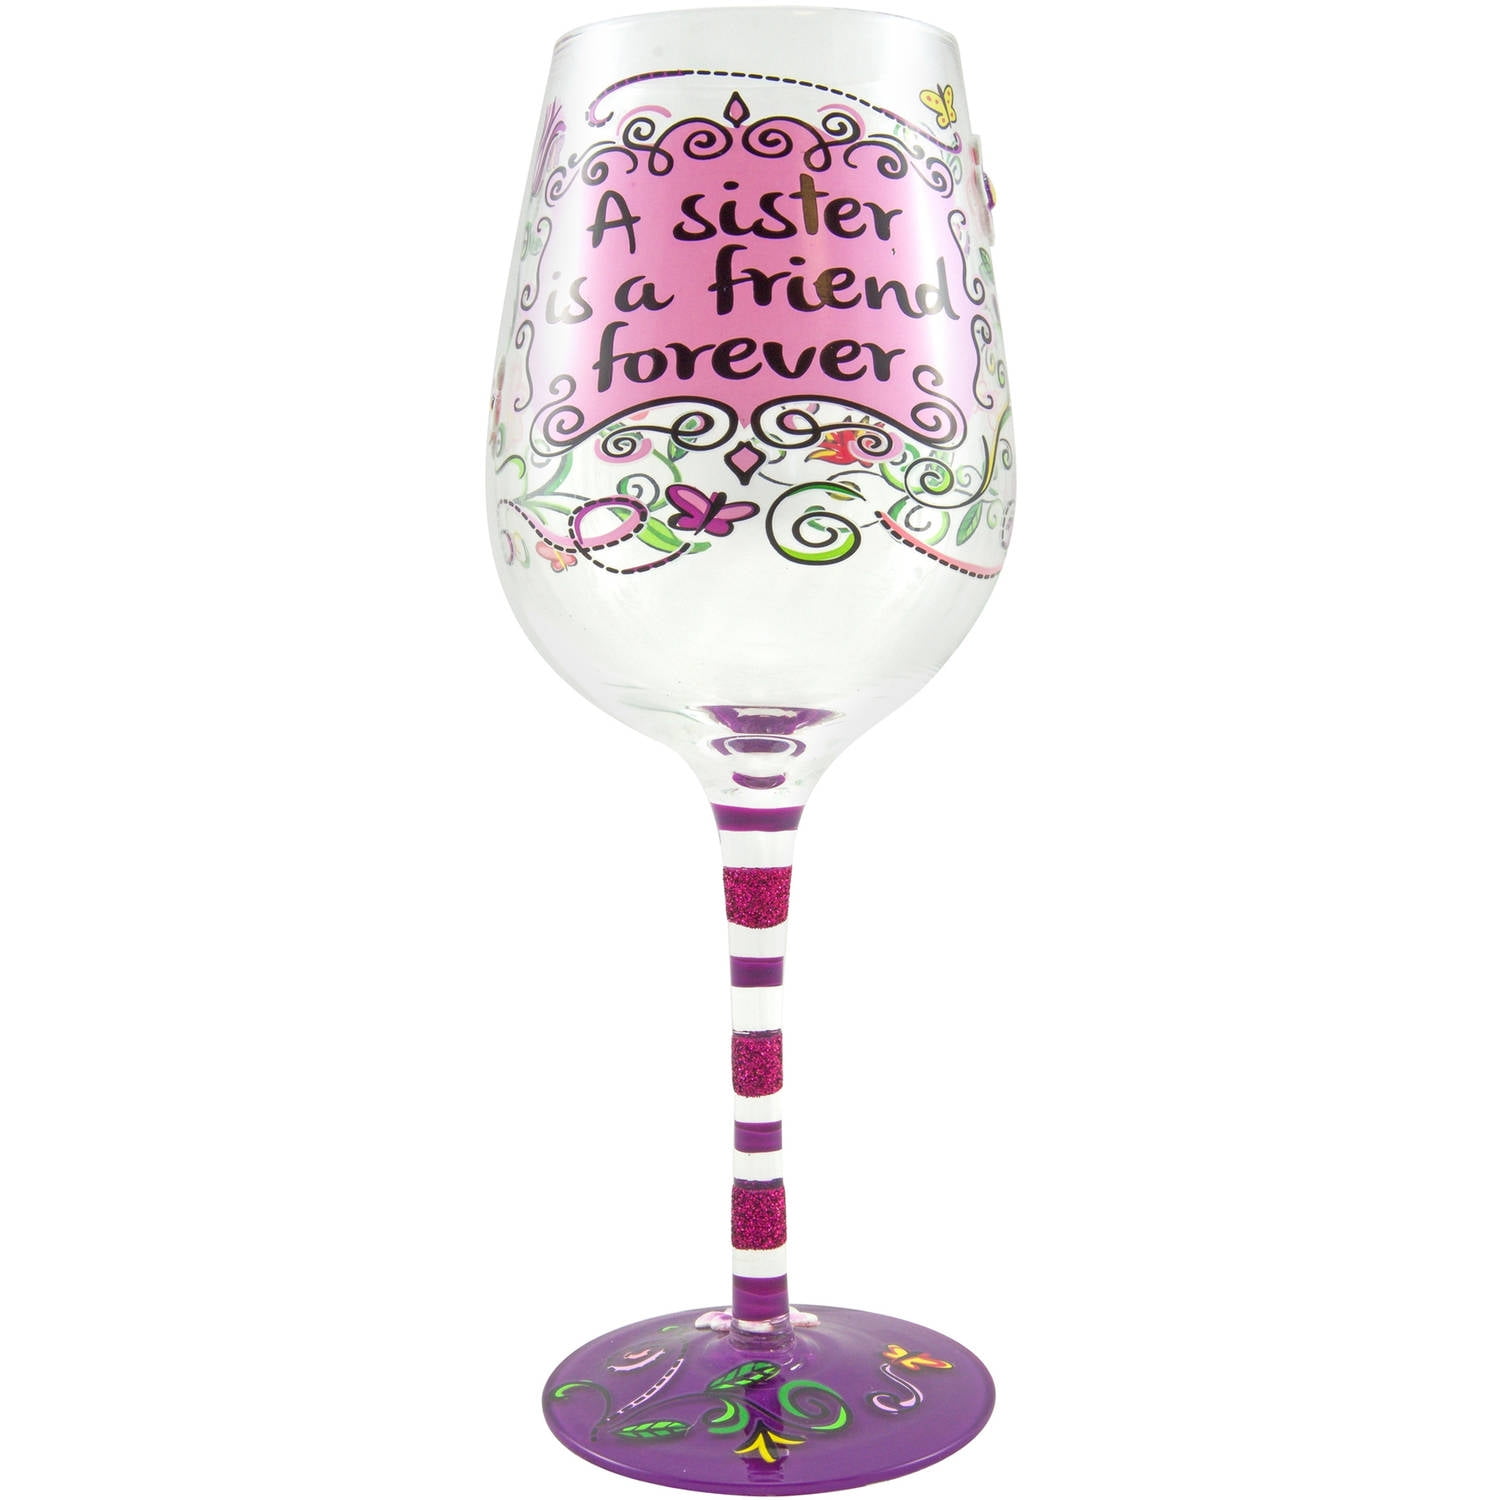 The 13 Best Wineglasses for Your Party Closet